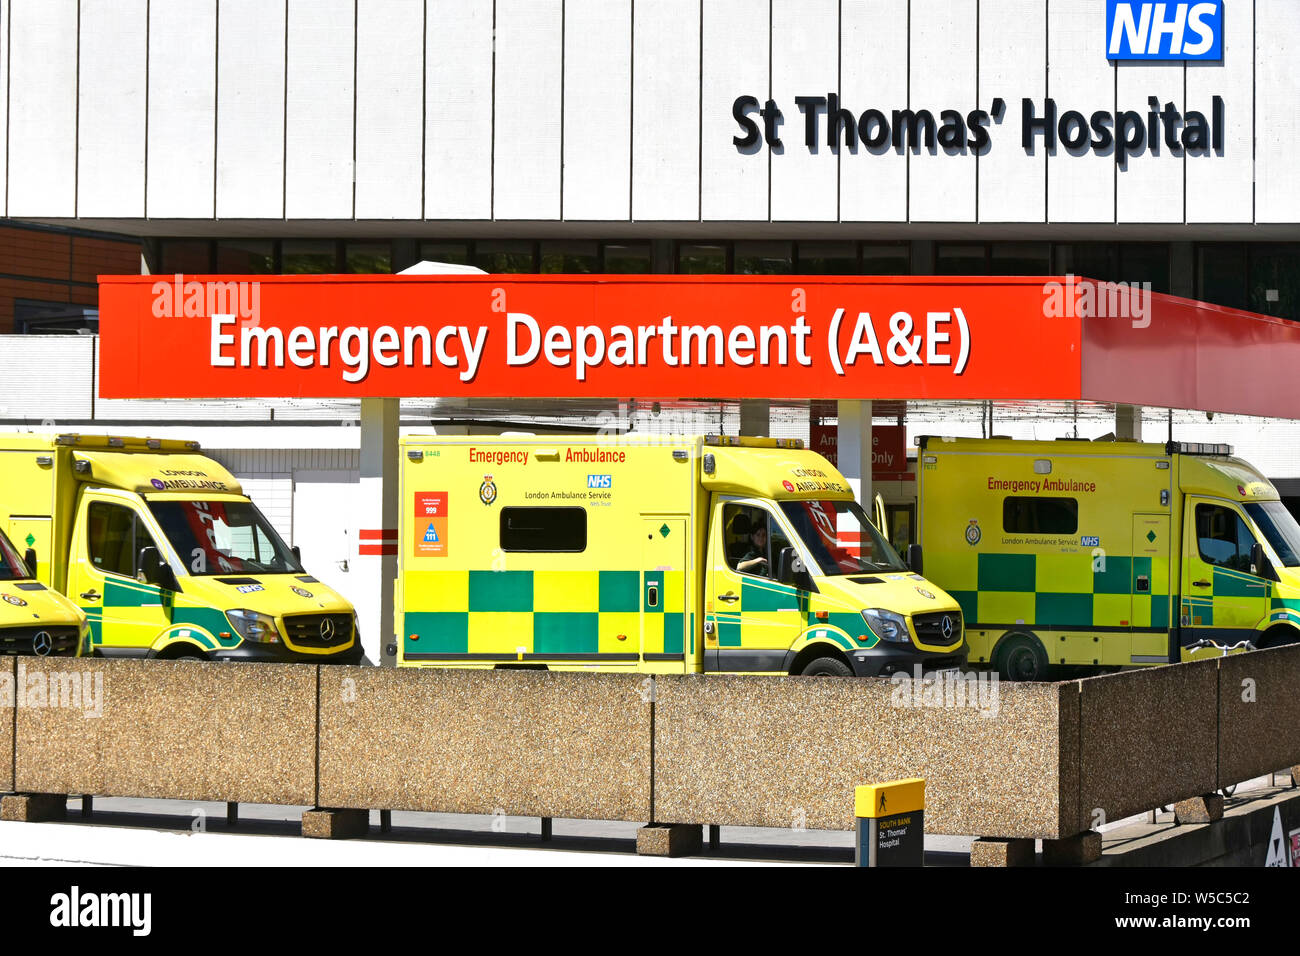 London ambulance service vehicles at St Thomas NHS hospital waiting at drop off area A&E accident emergency healthcare department building  Lambeth UK Stock Photo